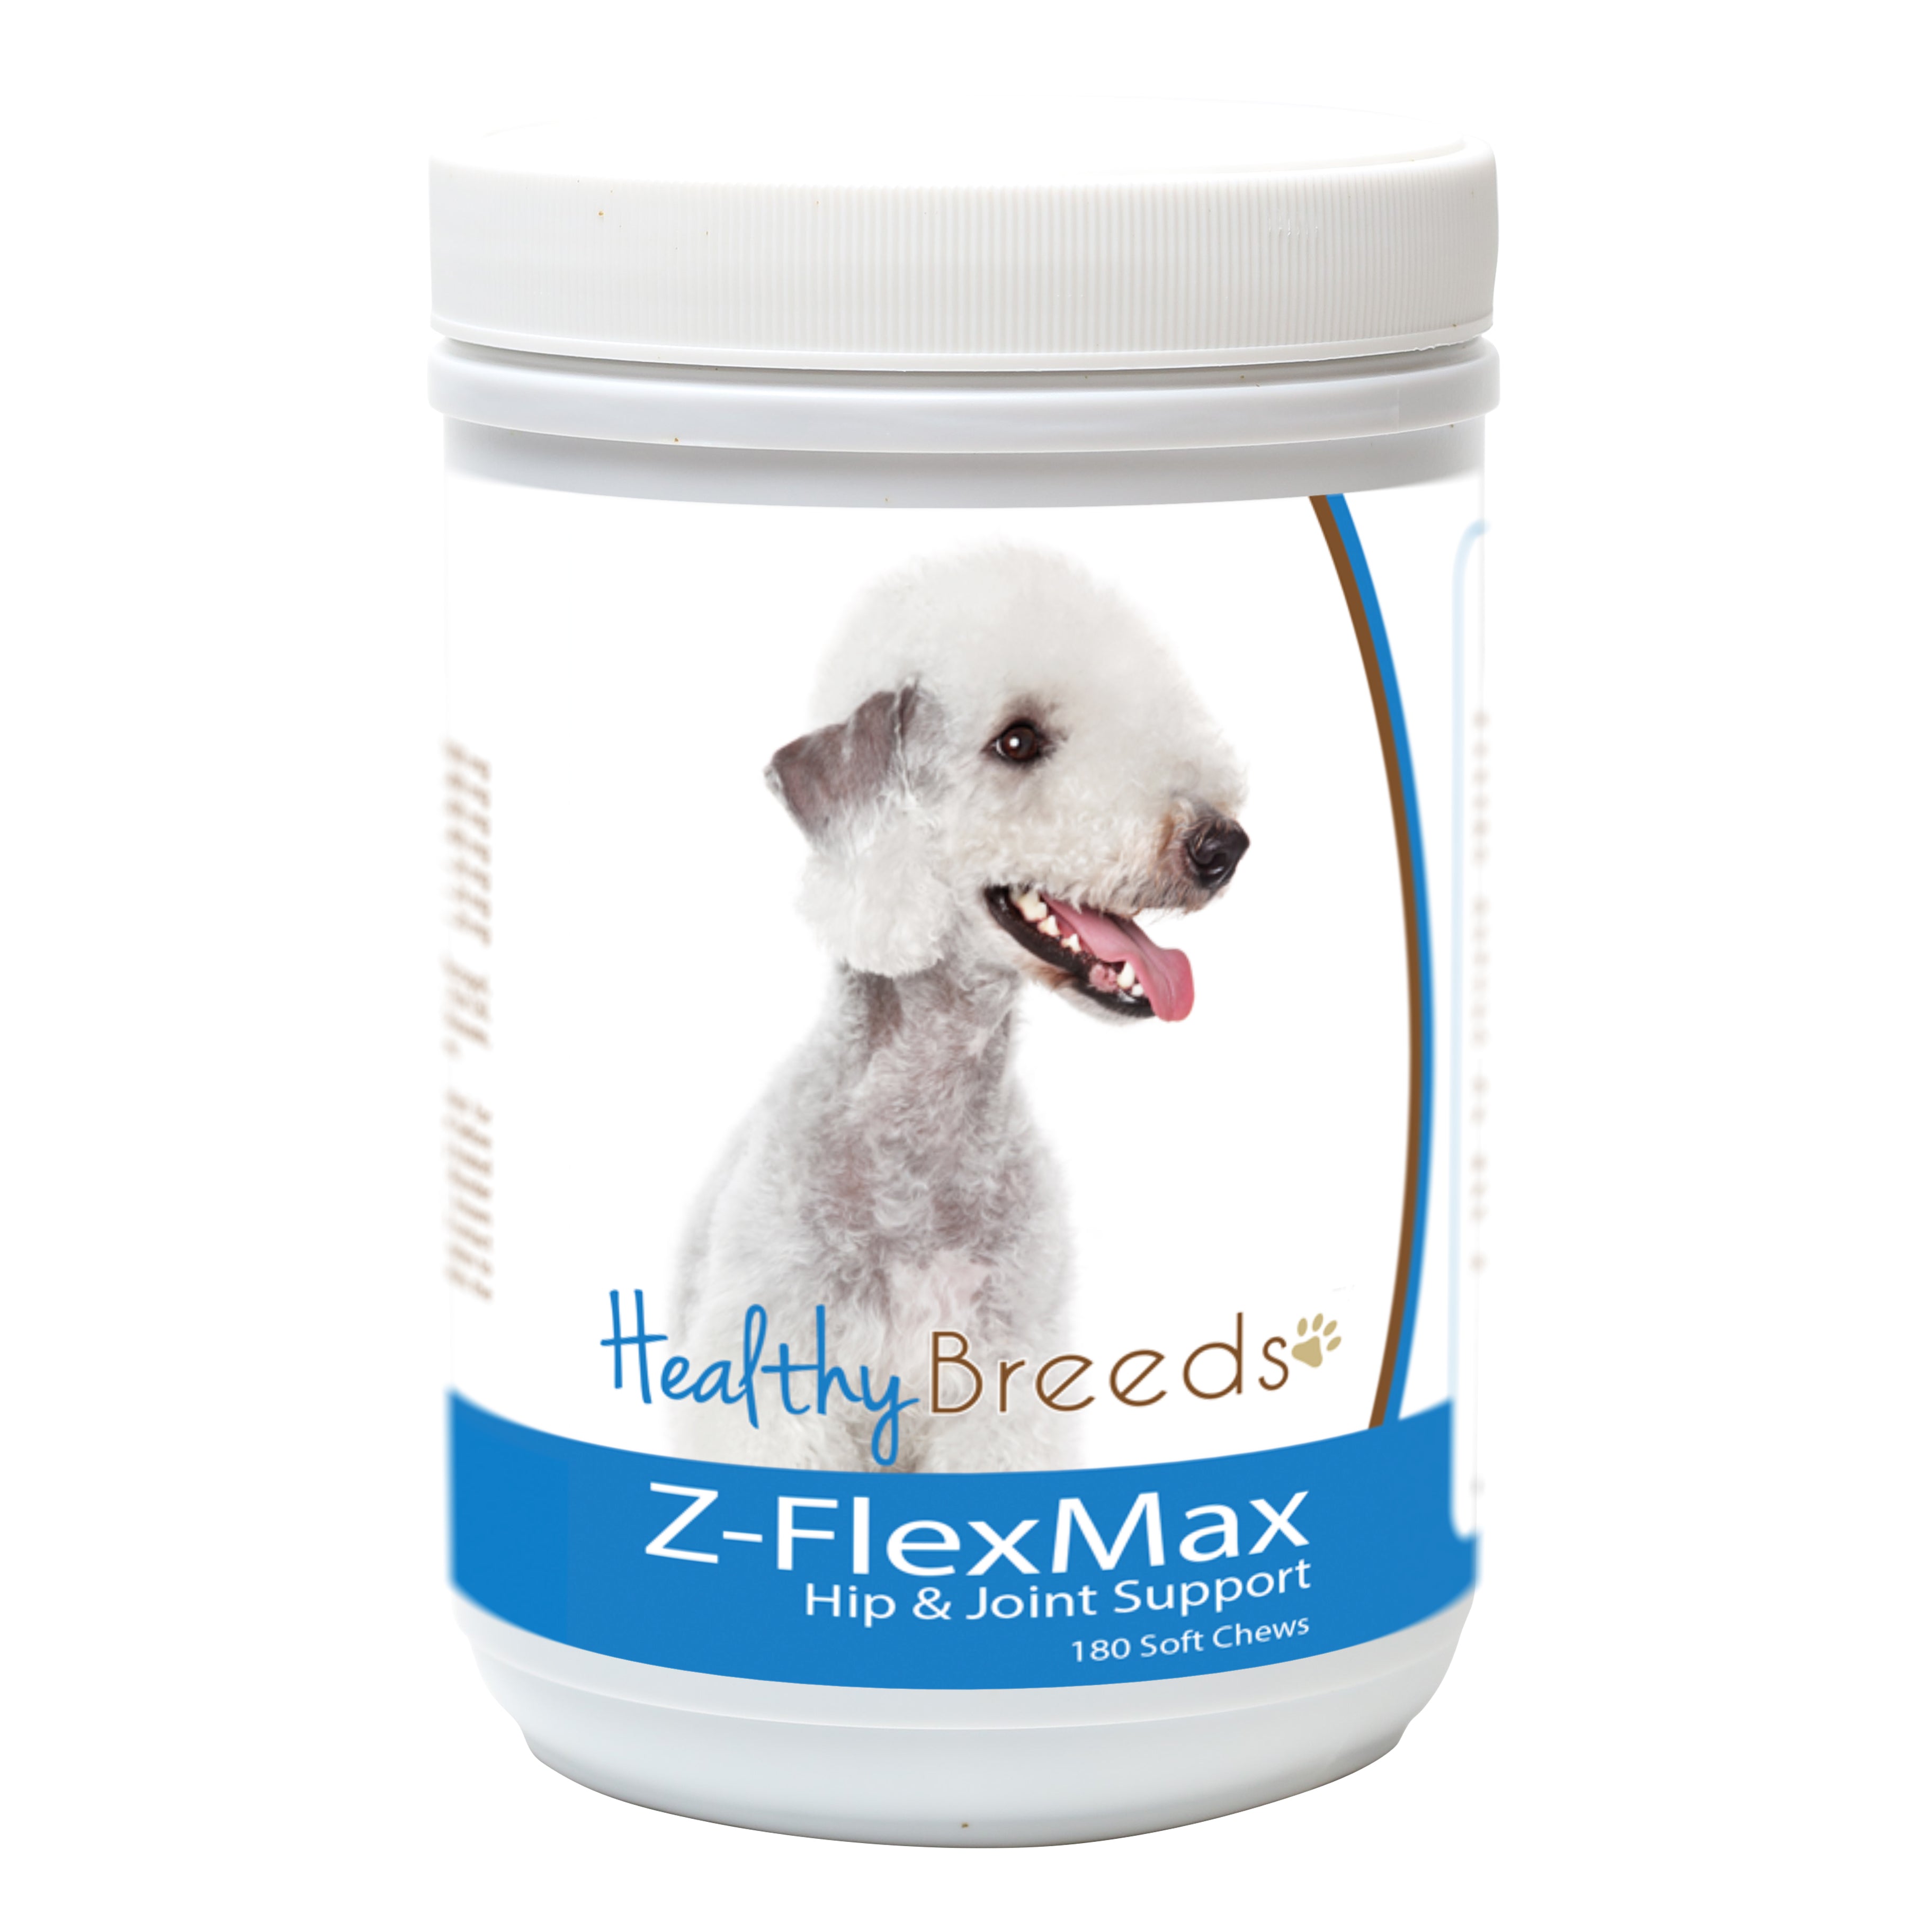 Bedlington Terrier Z-Flex Max Dog Hip and Joint Support 180 Count